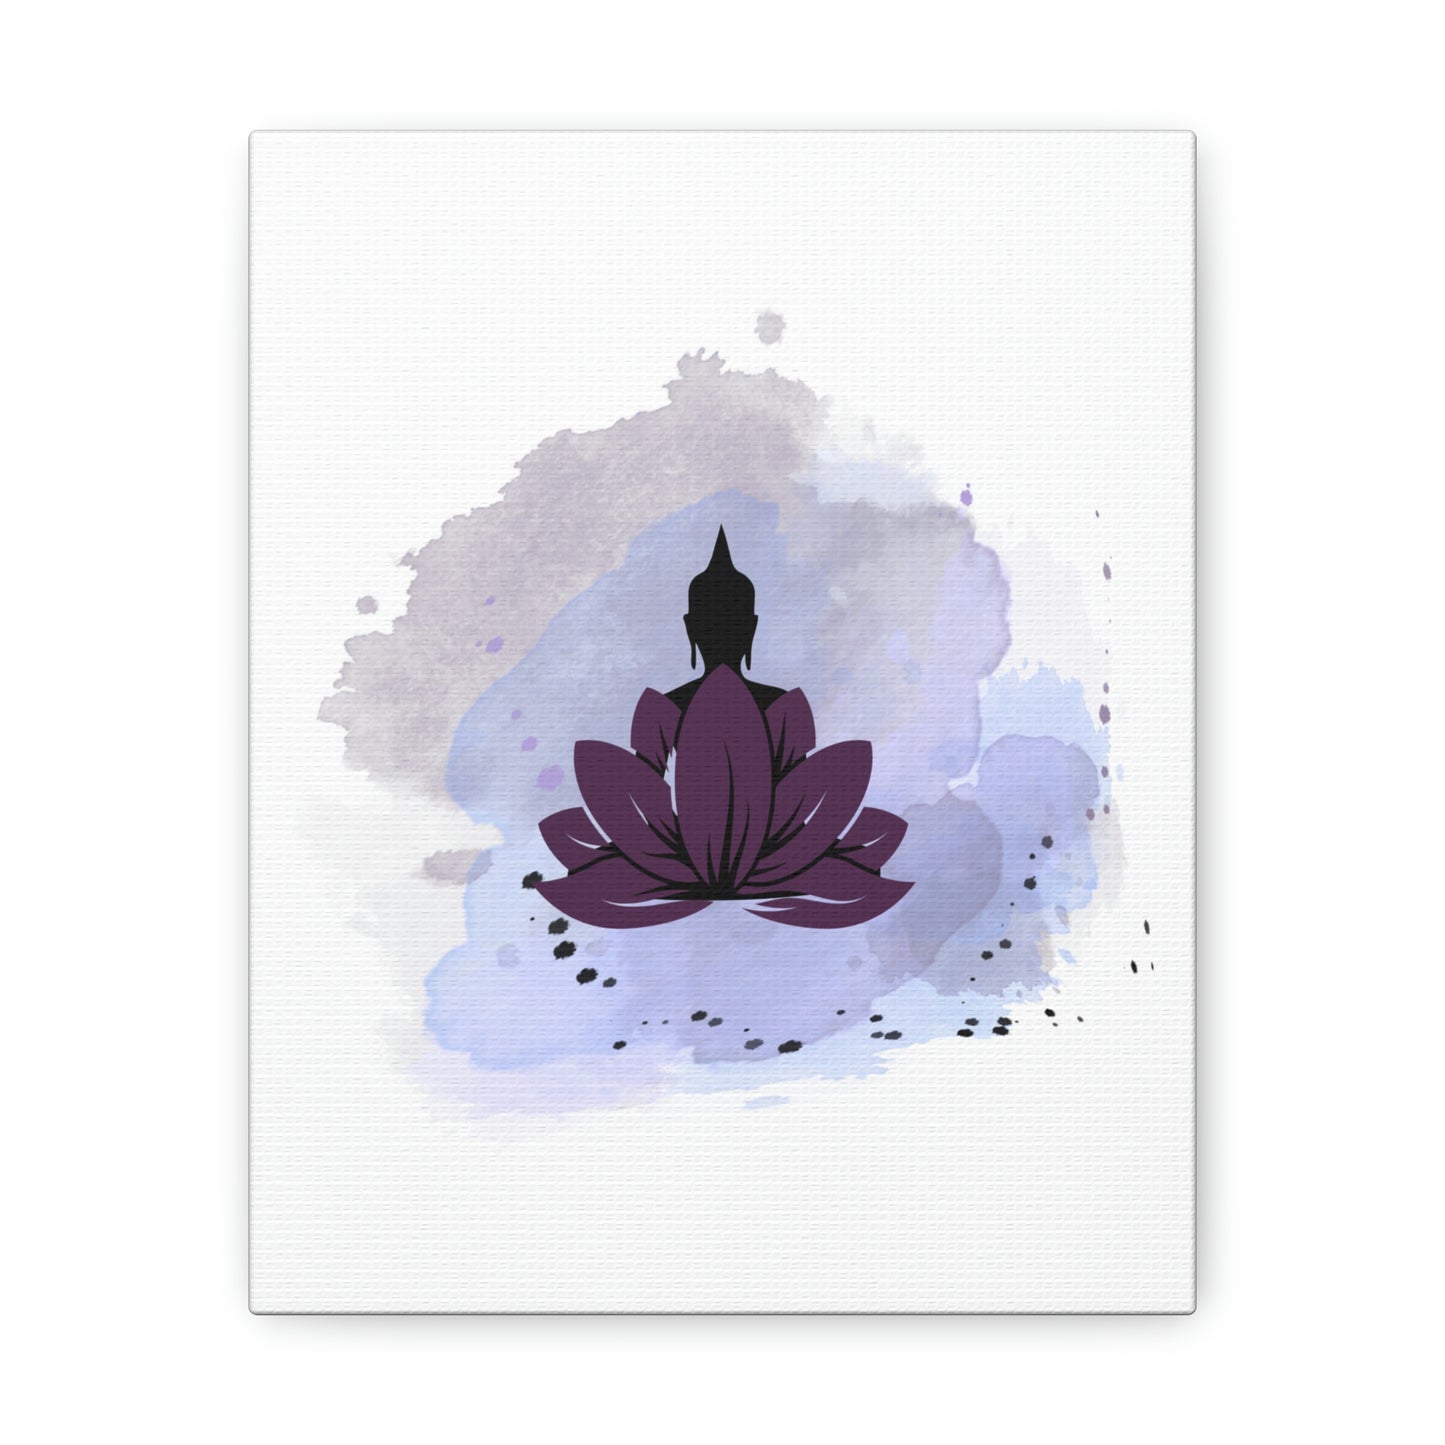 A "Meditation Lotus" 8 X 10 Wrapped Canvas Wall Art - NO FRAME Needed